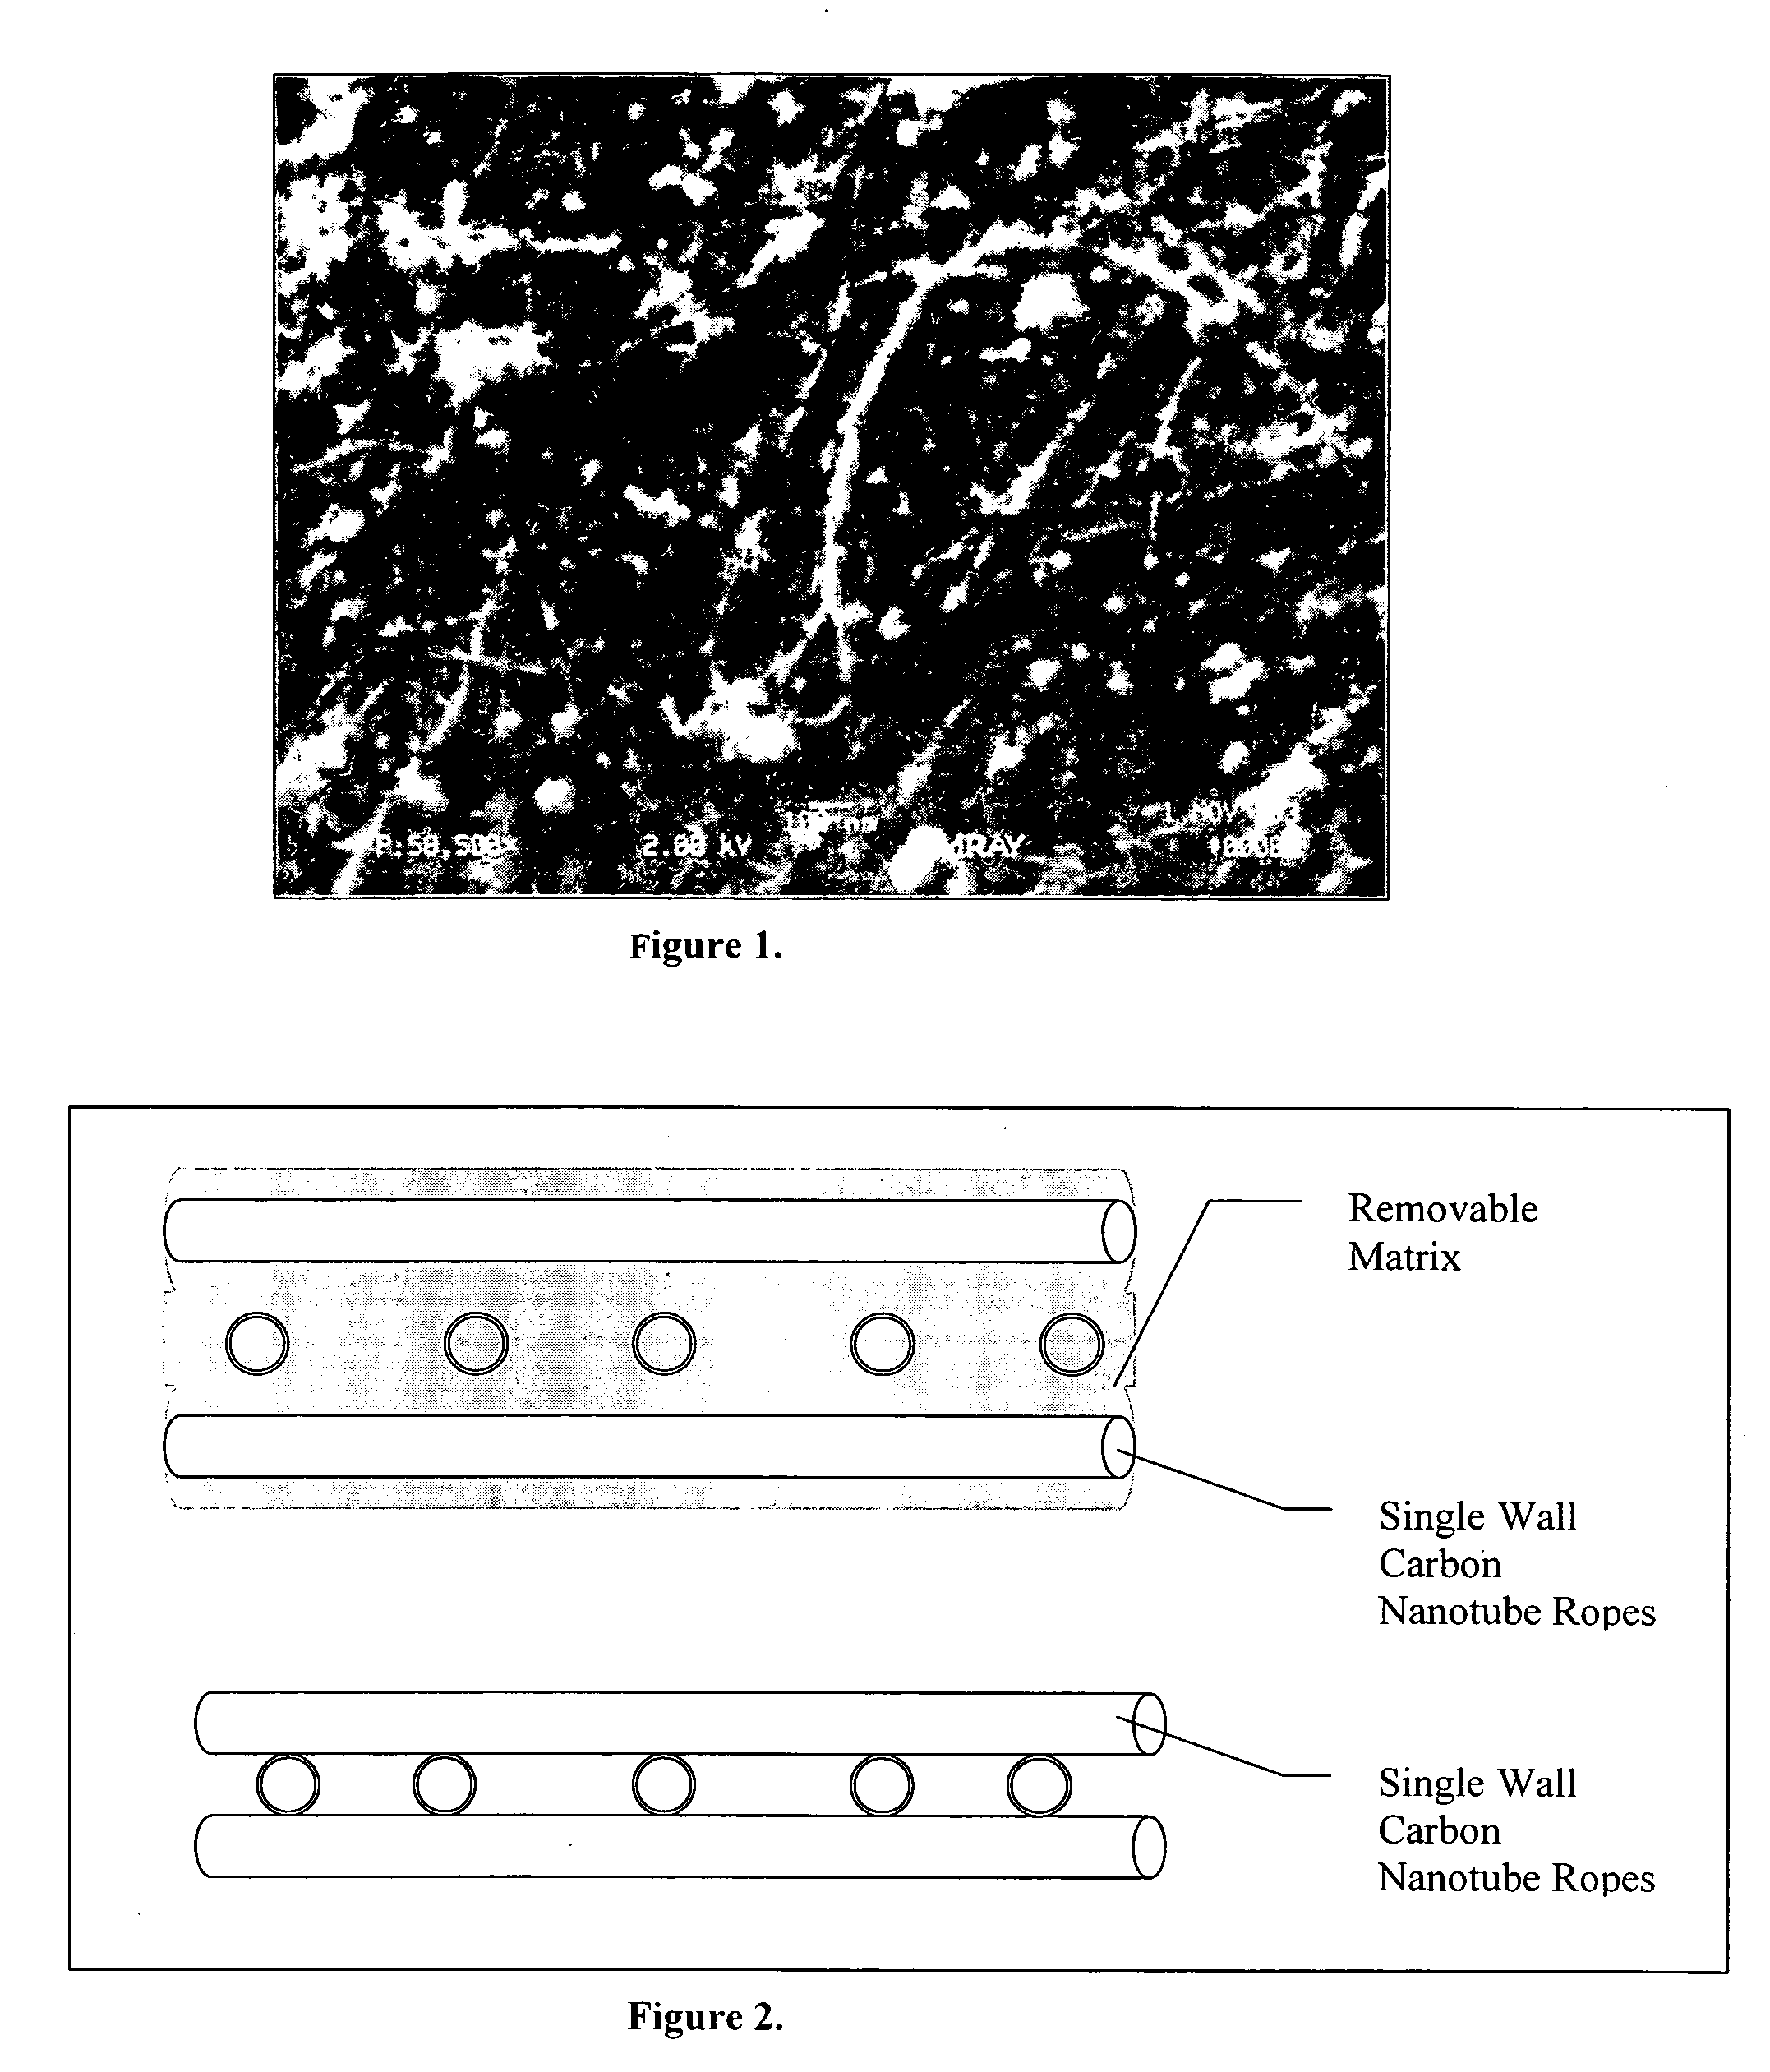 Methods for modifying carbon nanotube structures to enhance coating optical and electronic properties of transparent conductive coatings